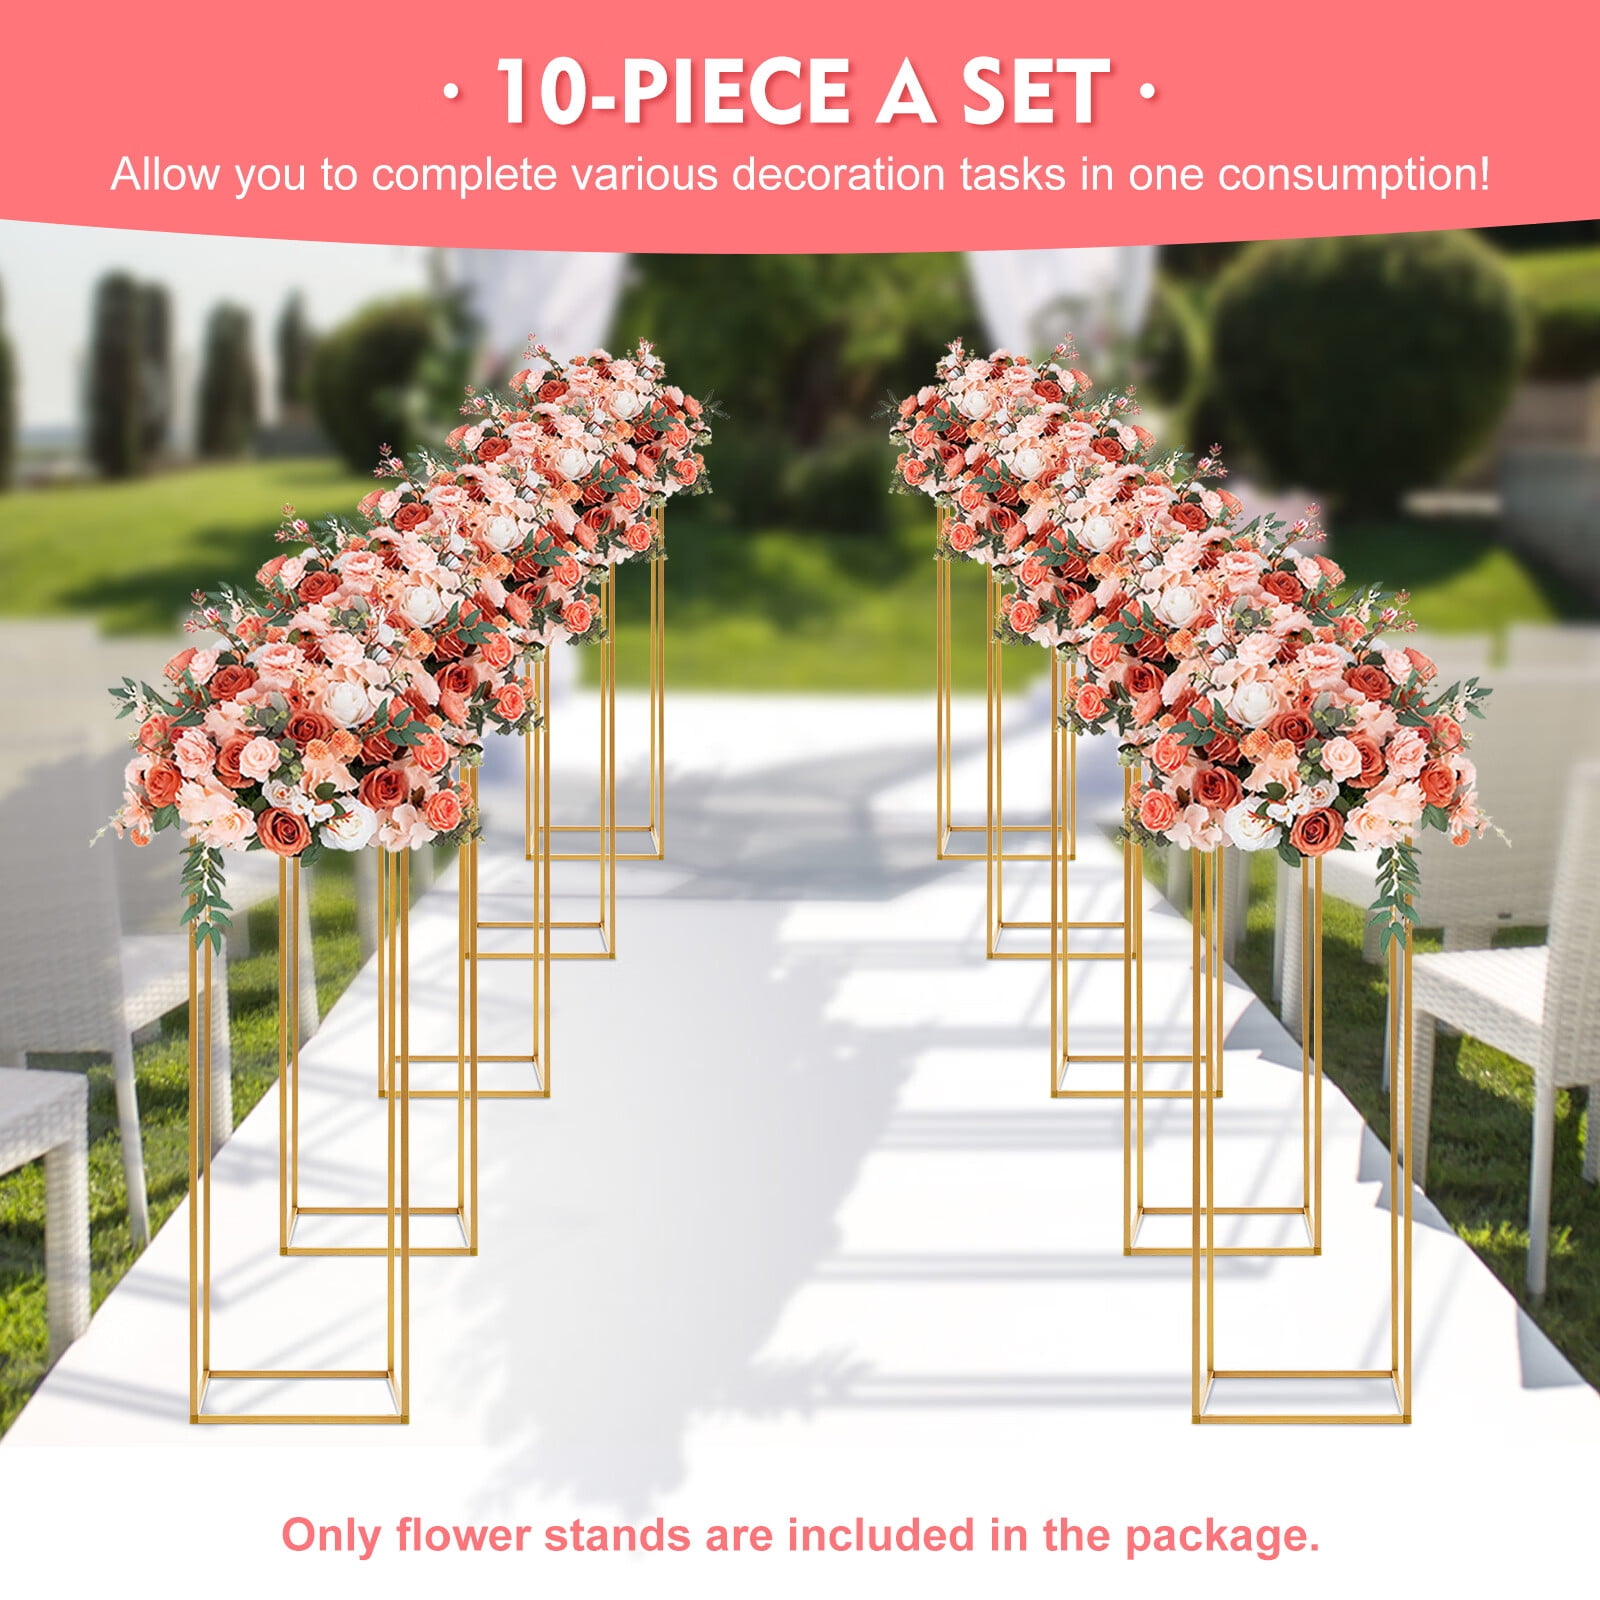 Anqidi Large Poster Stand Metal Wedding Decor Welcome Sign Rack Billboard  Advertising Shelf Holder Black 29.5x43.3In 